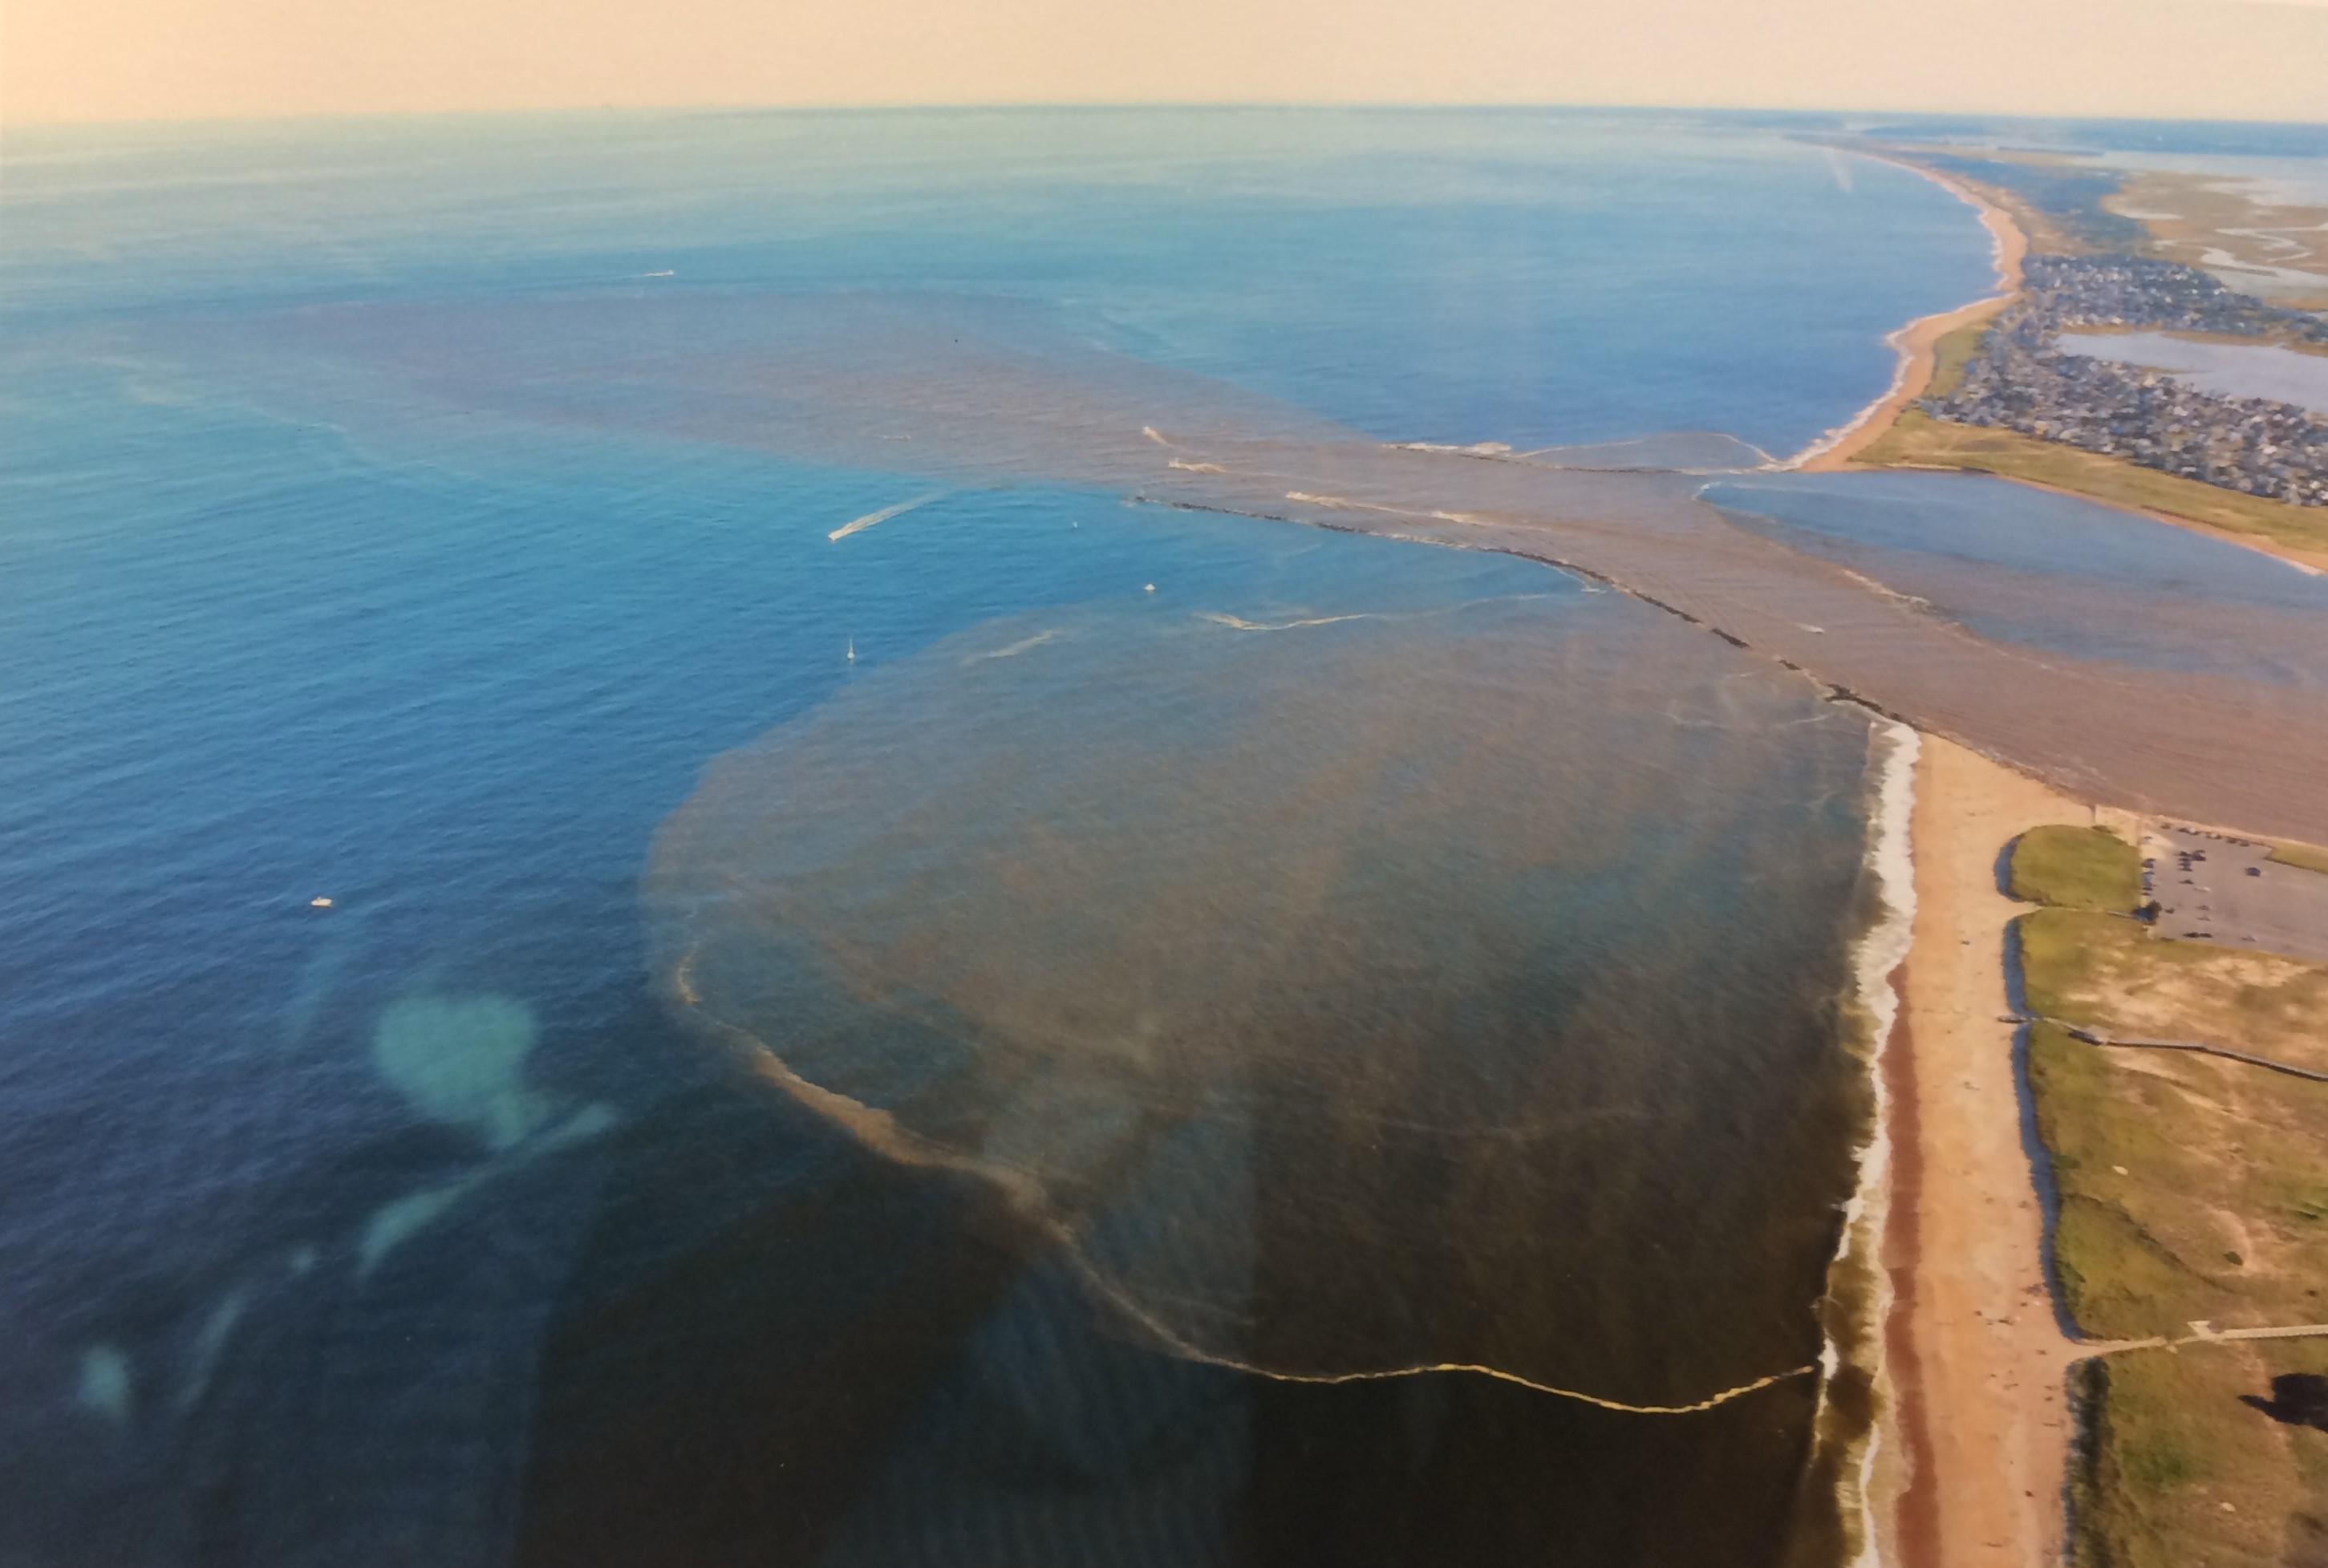 Polluted stormwater runoff can be seen spilling into the Gulf of Maine from overhead.